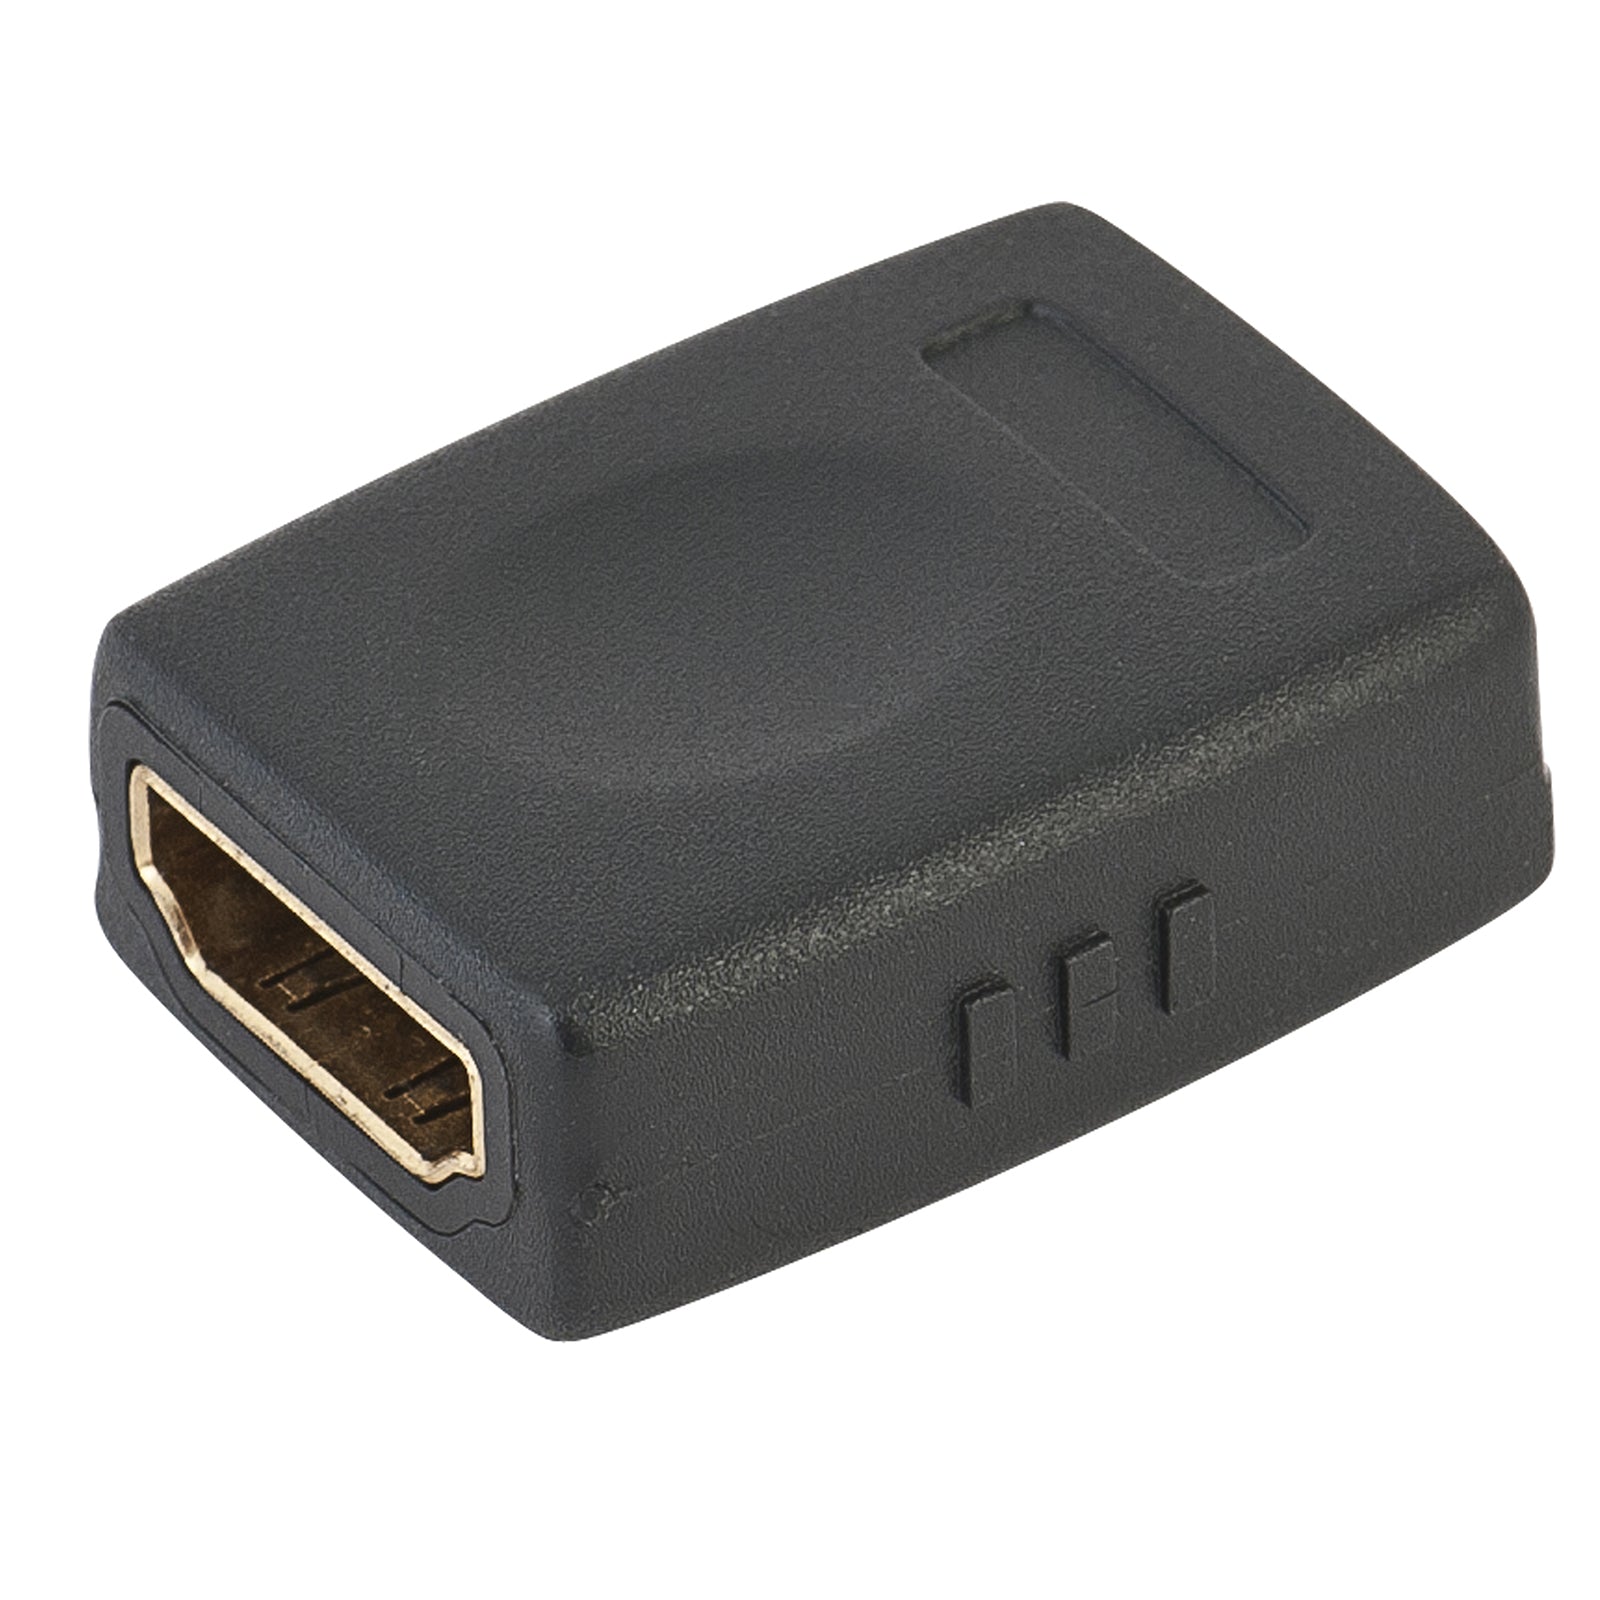 HDMI Lead Extended Adaptor